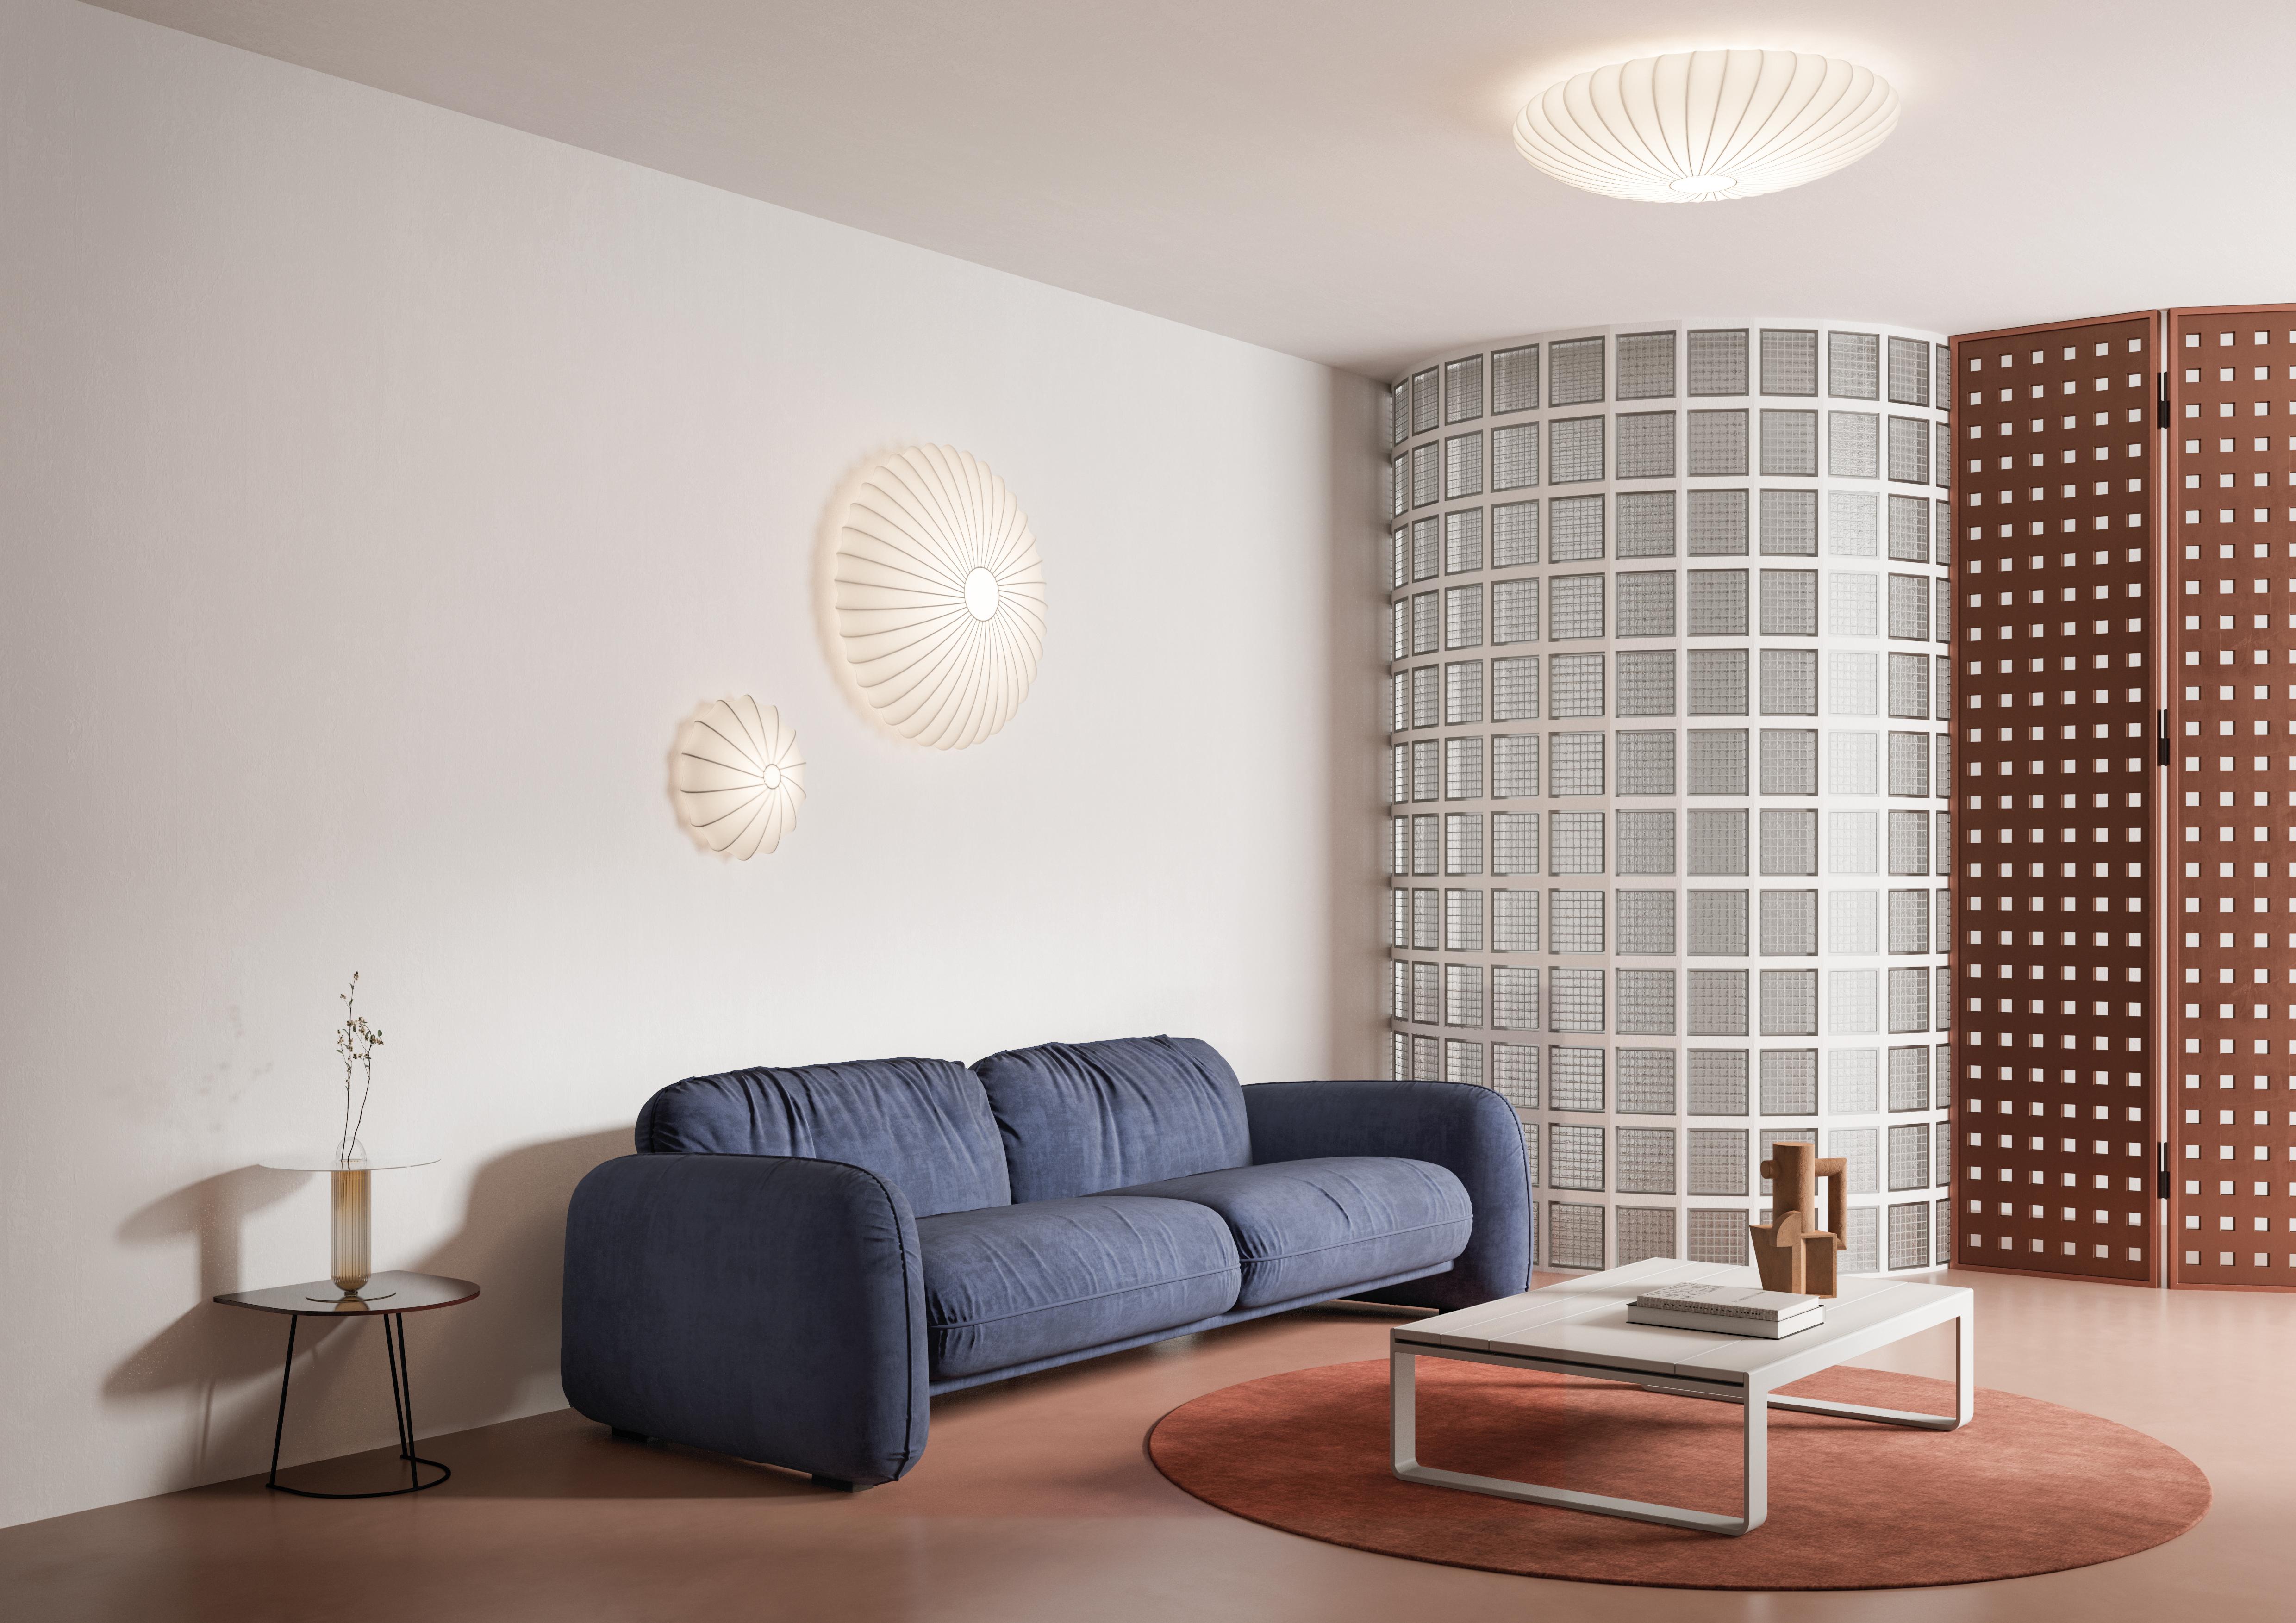 Axolight Muse Large Ceiling Light in White with White Metal Finish by Sandro Santantonio

Cheerfulness meets inspiration and together they create Muse. Energetic colours, sinuous lines, fluid fabric come together, leaving the imagination completely